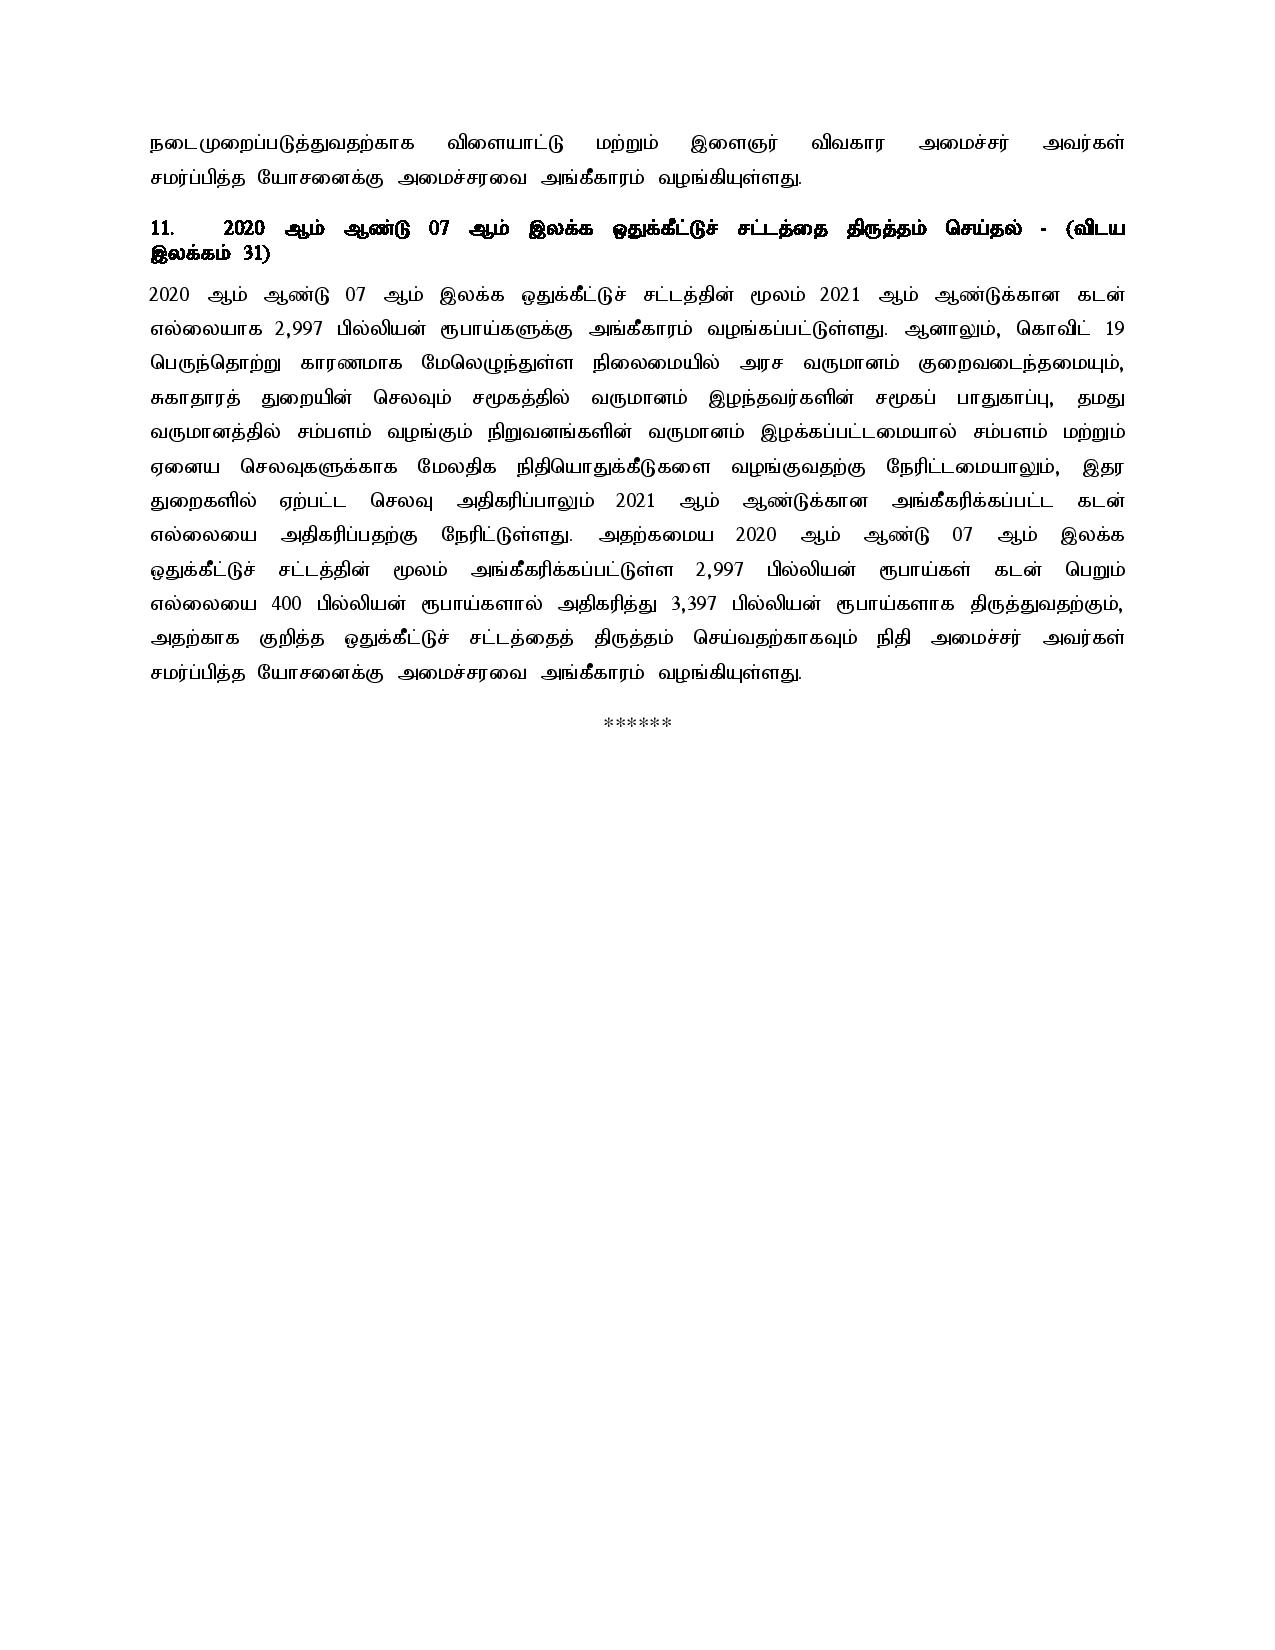 Cabinet Decisions on 21.09.2021 Tamil page 005